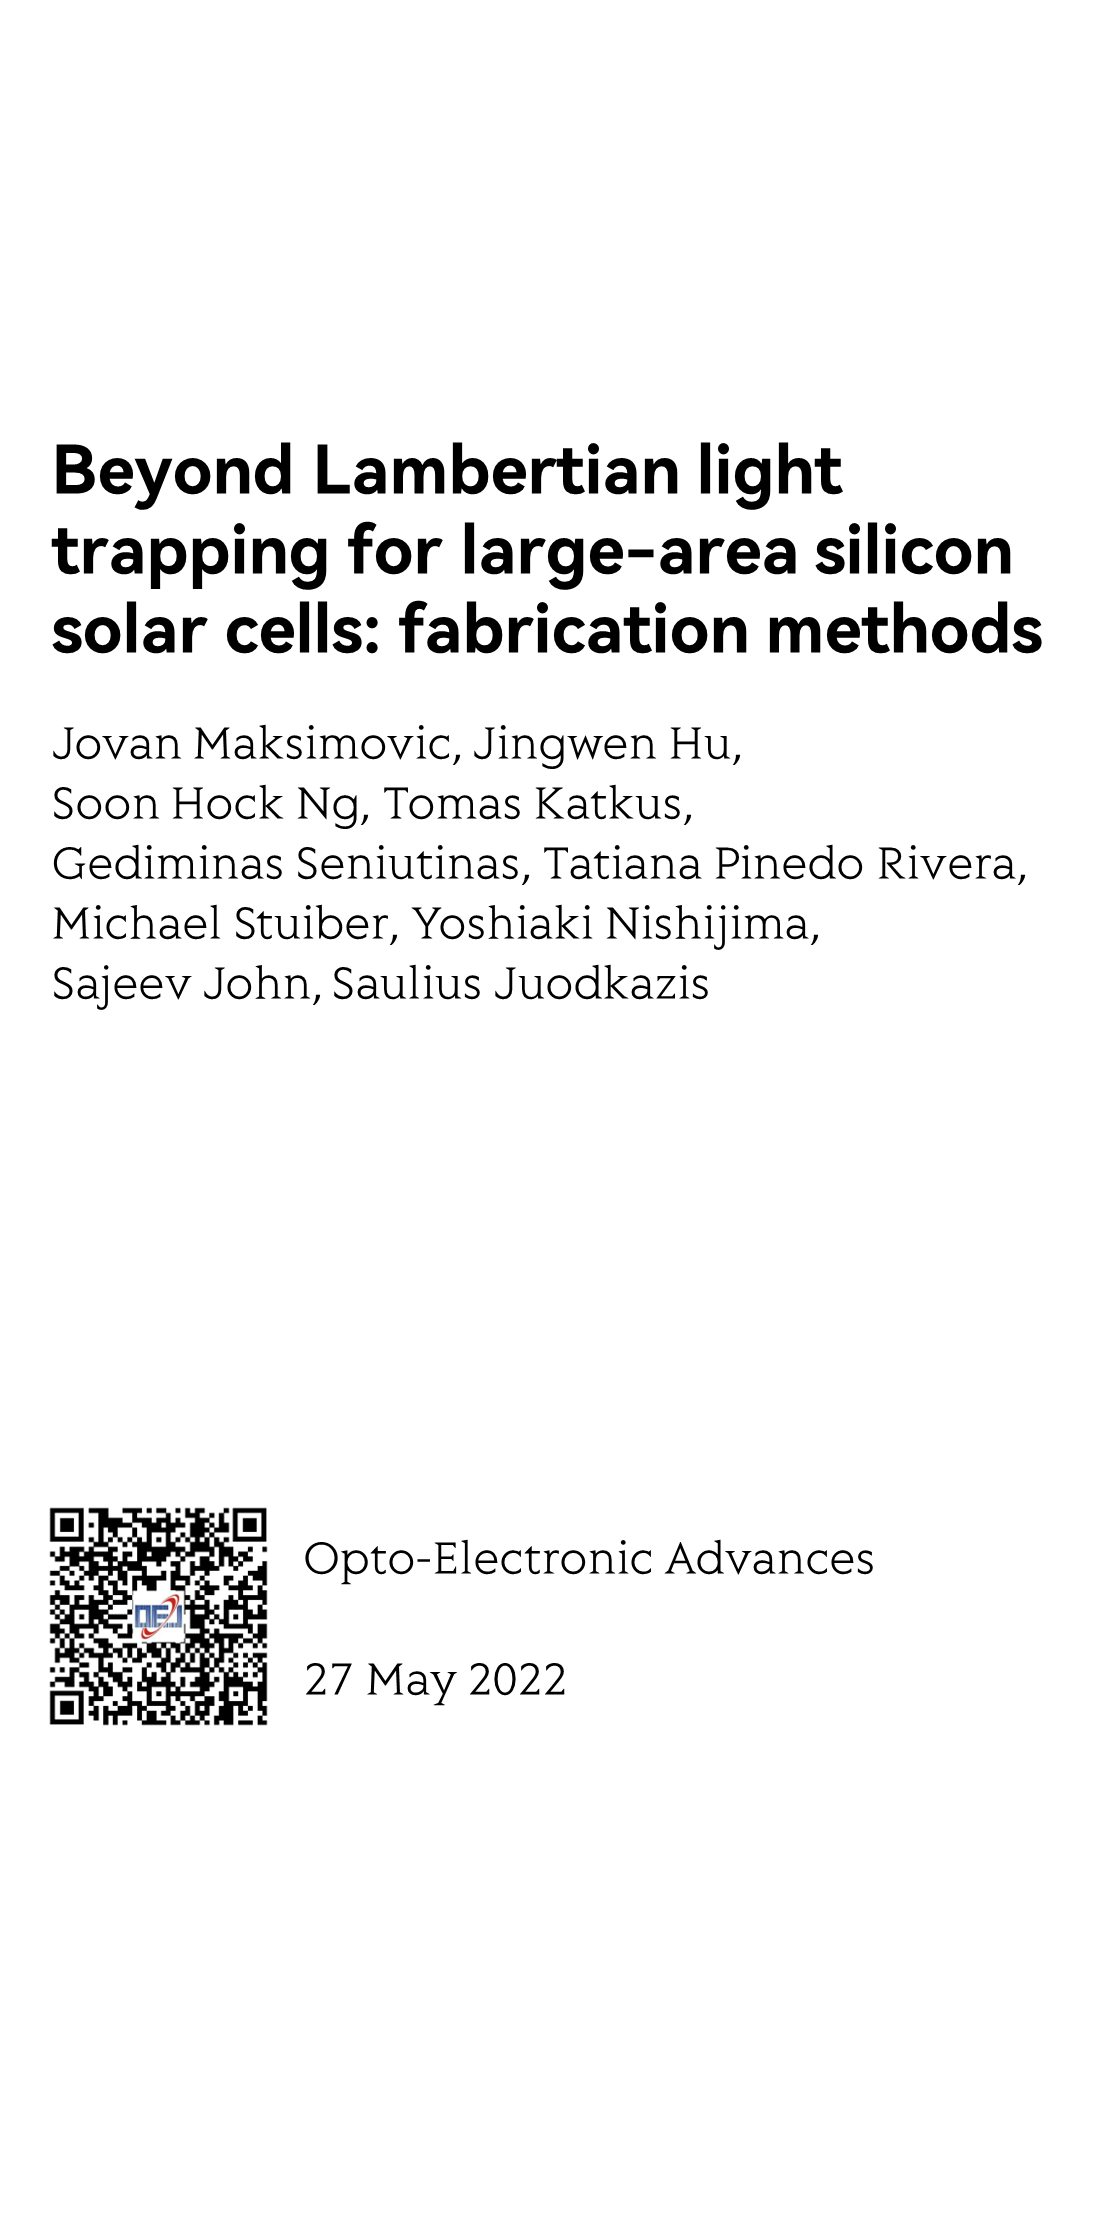 Beyond Lambertian light trapping for large-area silicon solar cells: fabrication methods_1